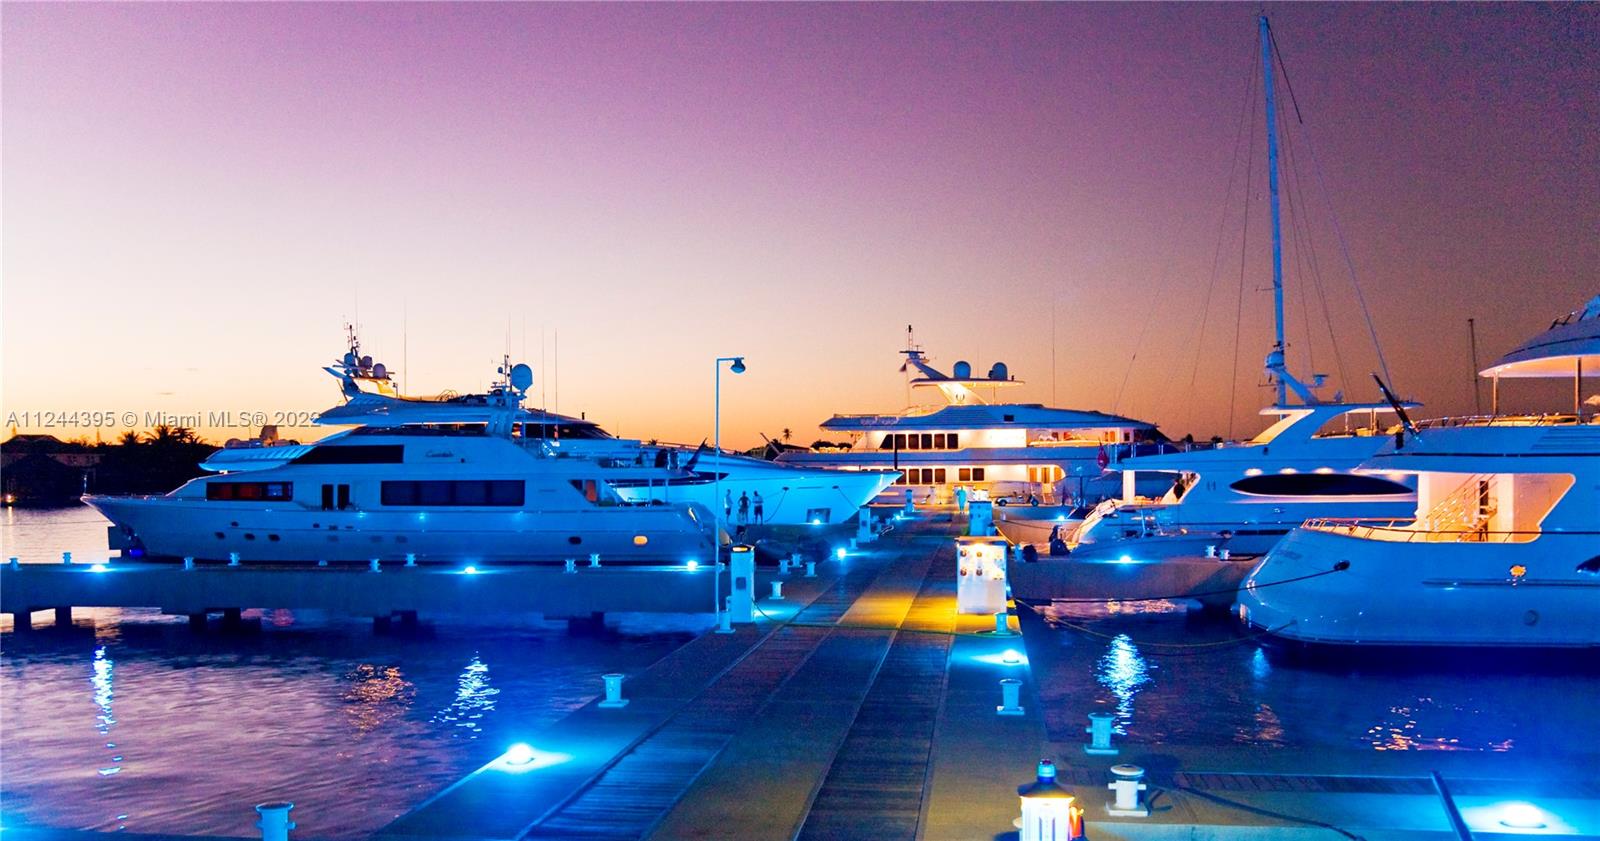 Fancy a yacht for a day? Visit the Rodney Bay Marina for water activities, island cuisine, and shopping.